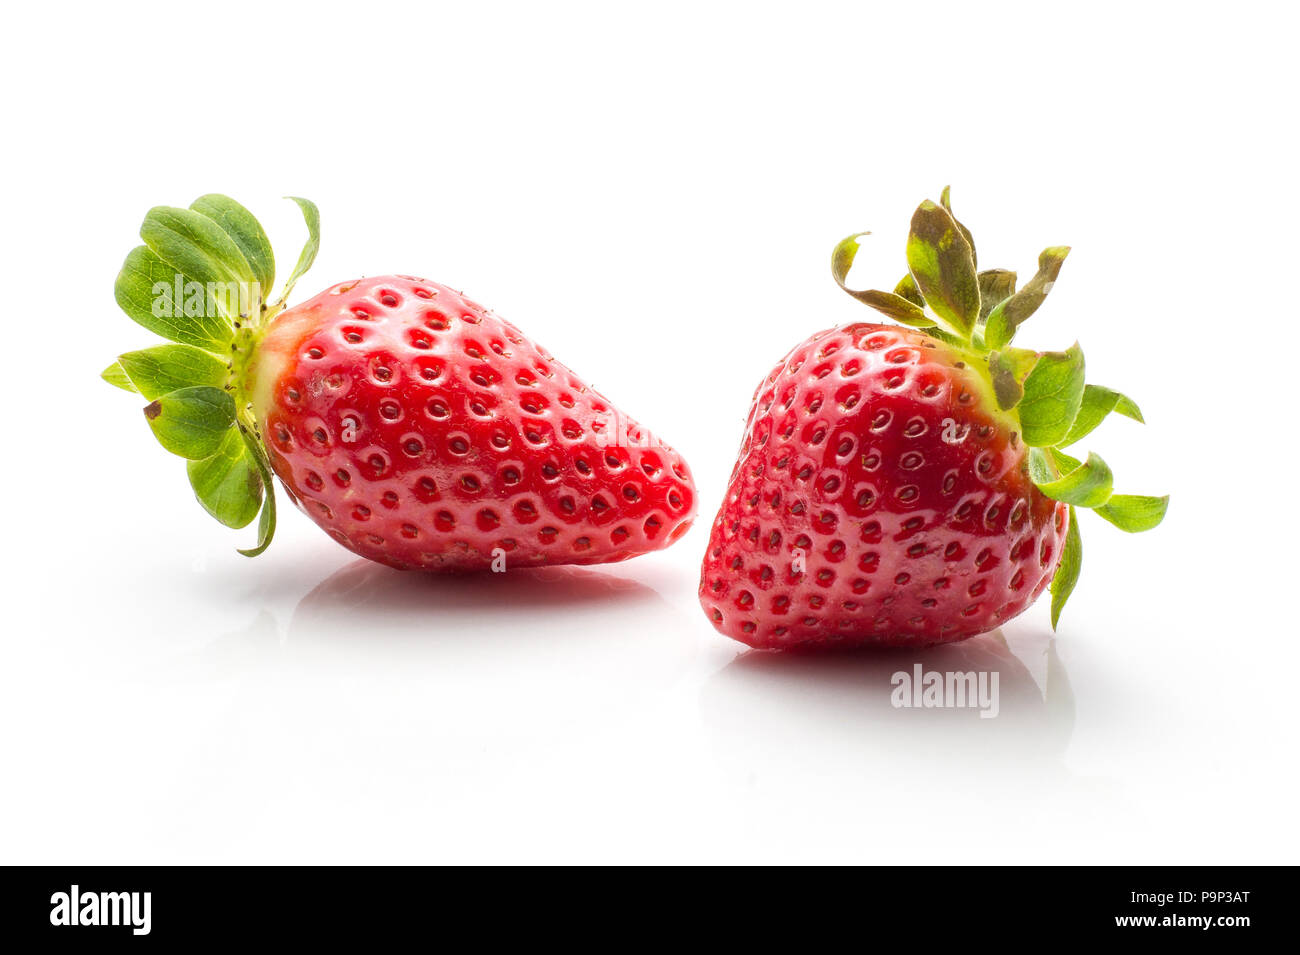 Two garden strawberries isolated on white background ripe and fresh Stock Photo